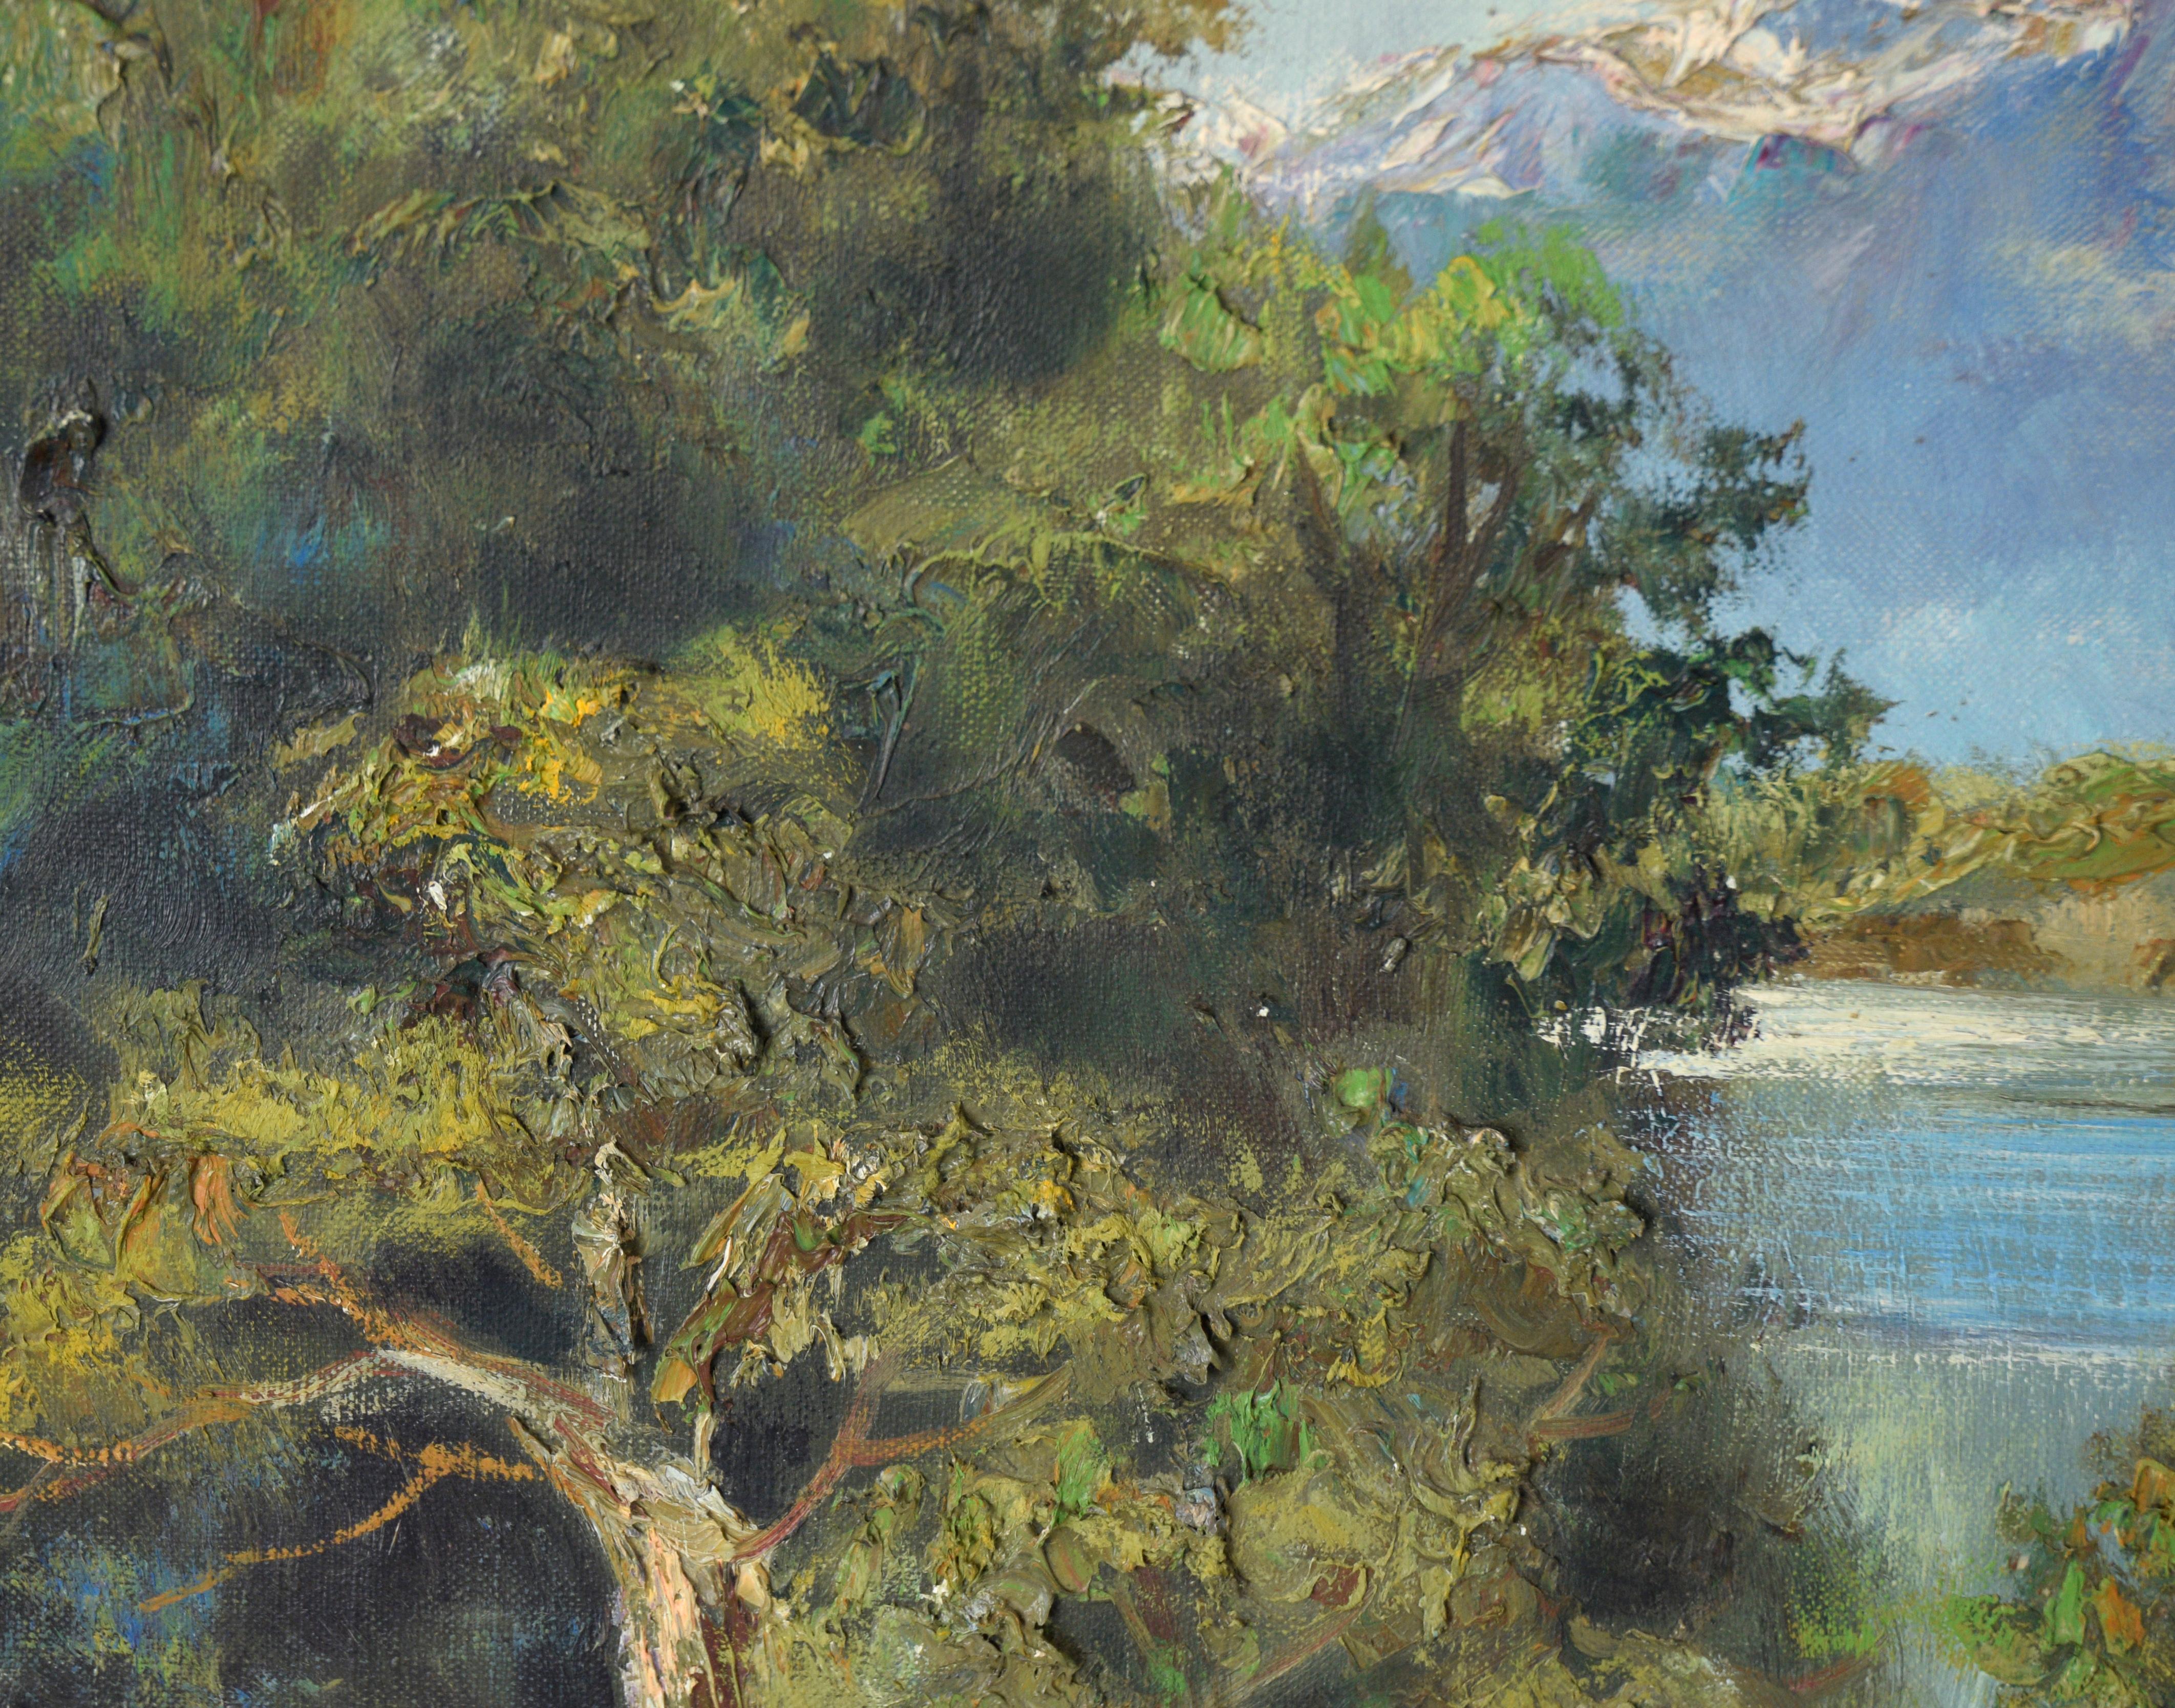 Mountain Lake Landscape in Oil on Canvas

Serene mountain landscape by notable architect and artist Masao Kinoshita (Japanese-American, 1925-2003). The viewer stands at the edge of a mountain lake, looking out over the water from behind some trees.